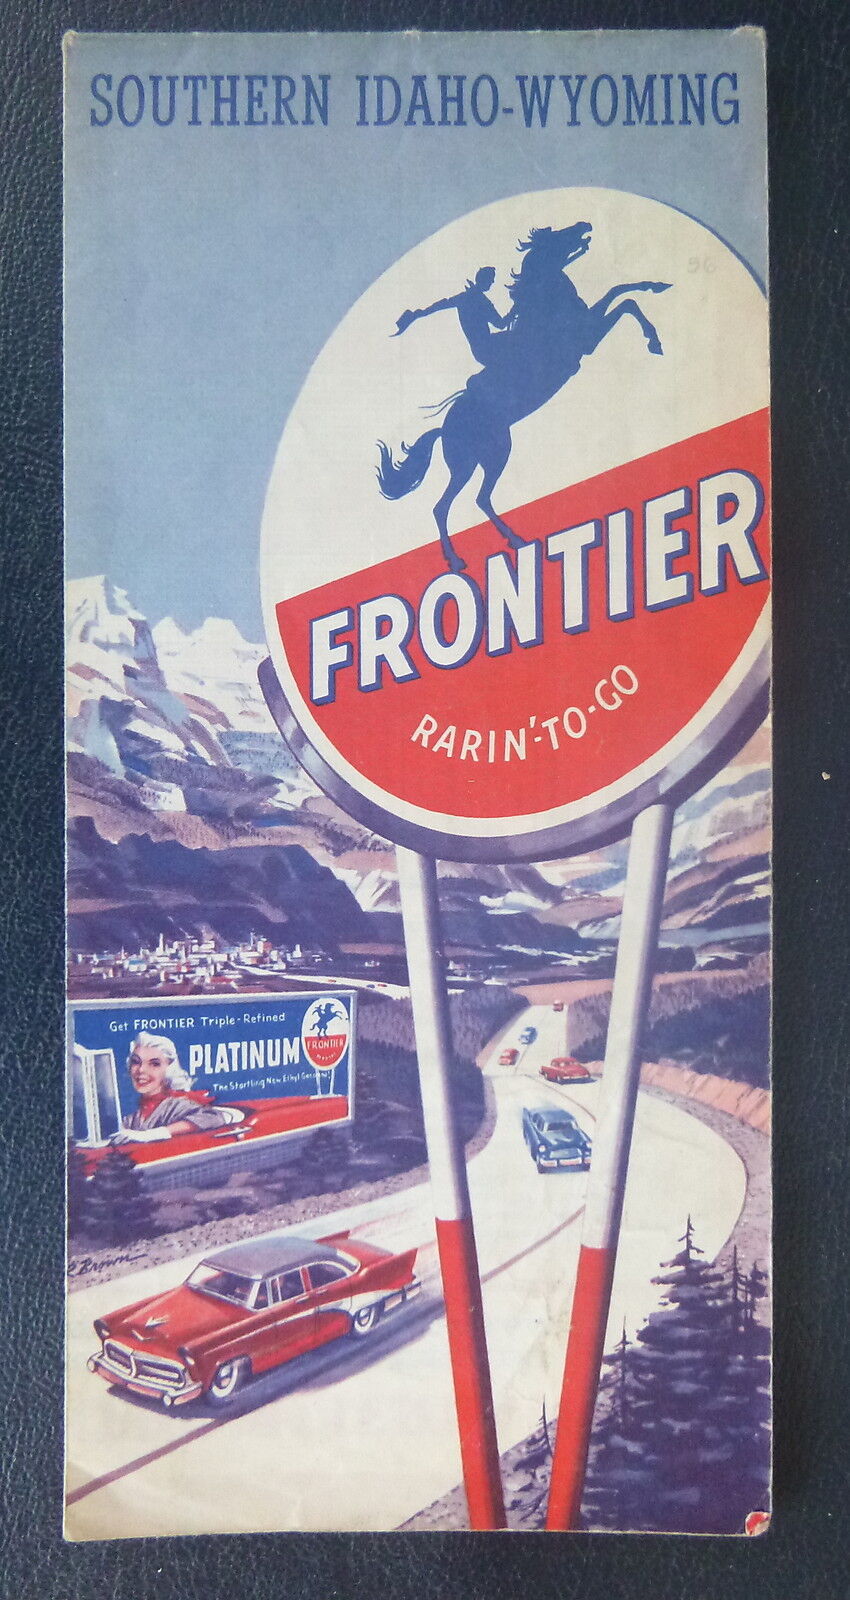 1957 Southern Idaho Wyoming  road map Frontier oil  gas